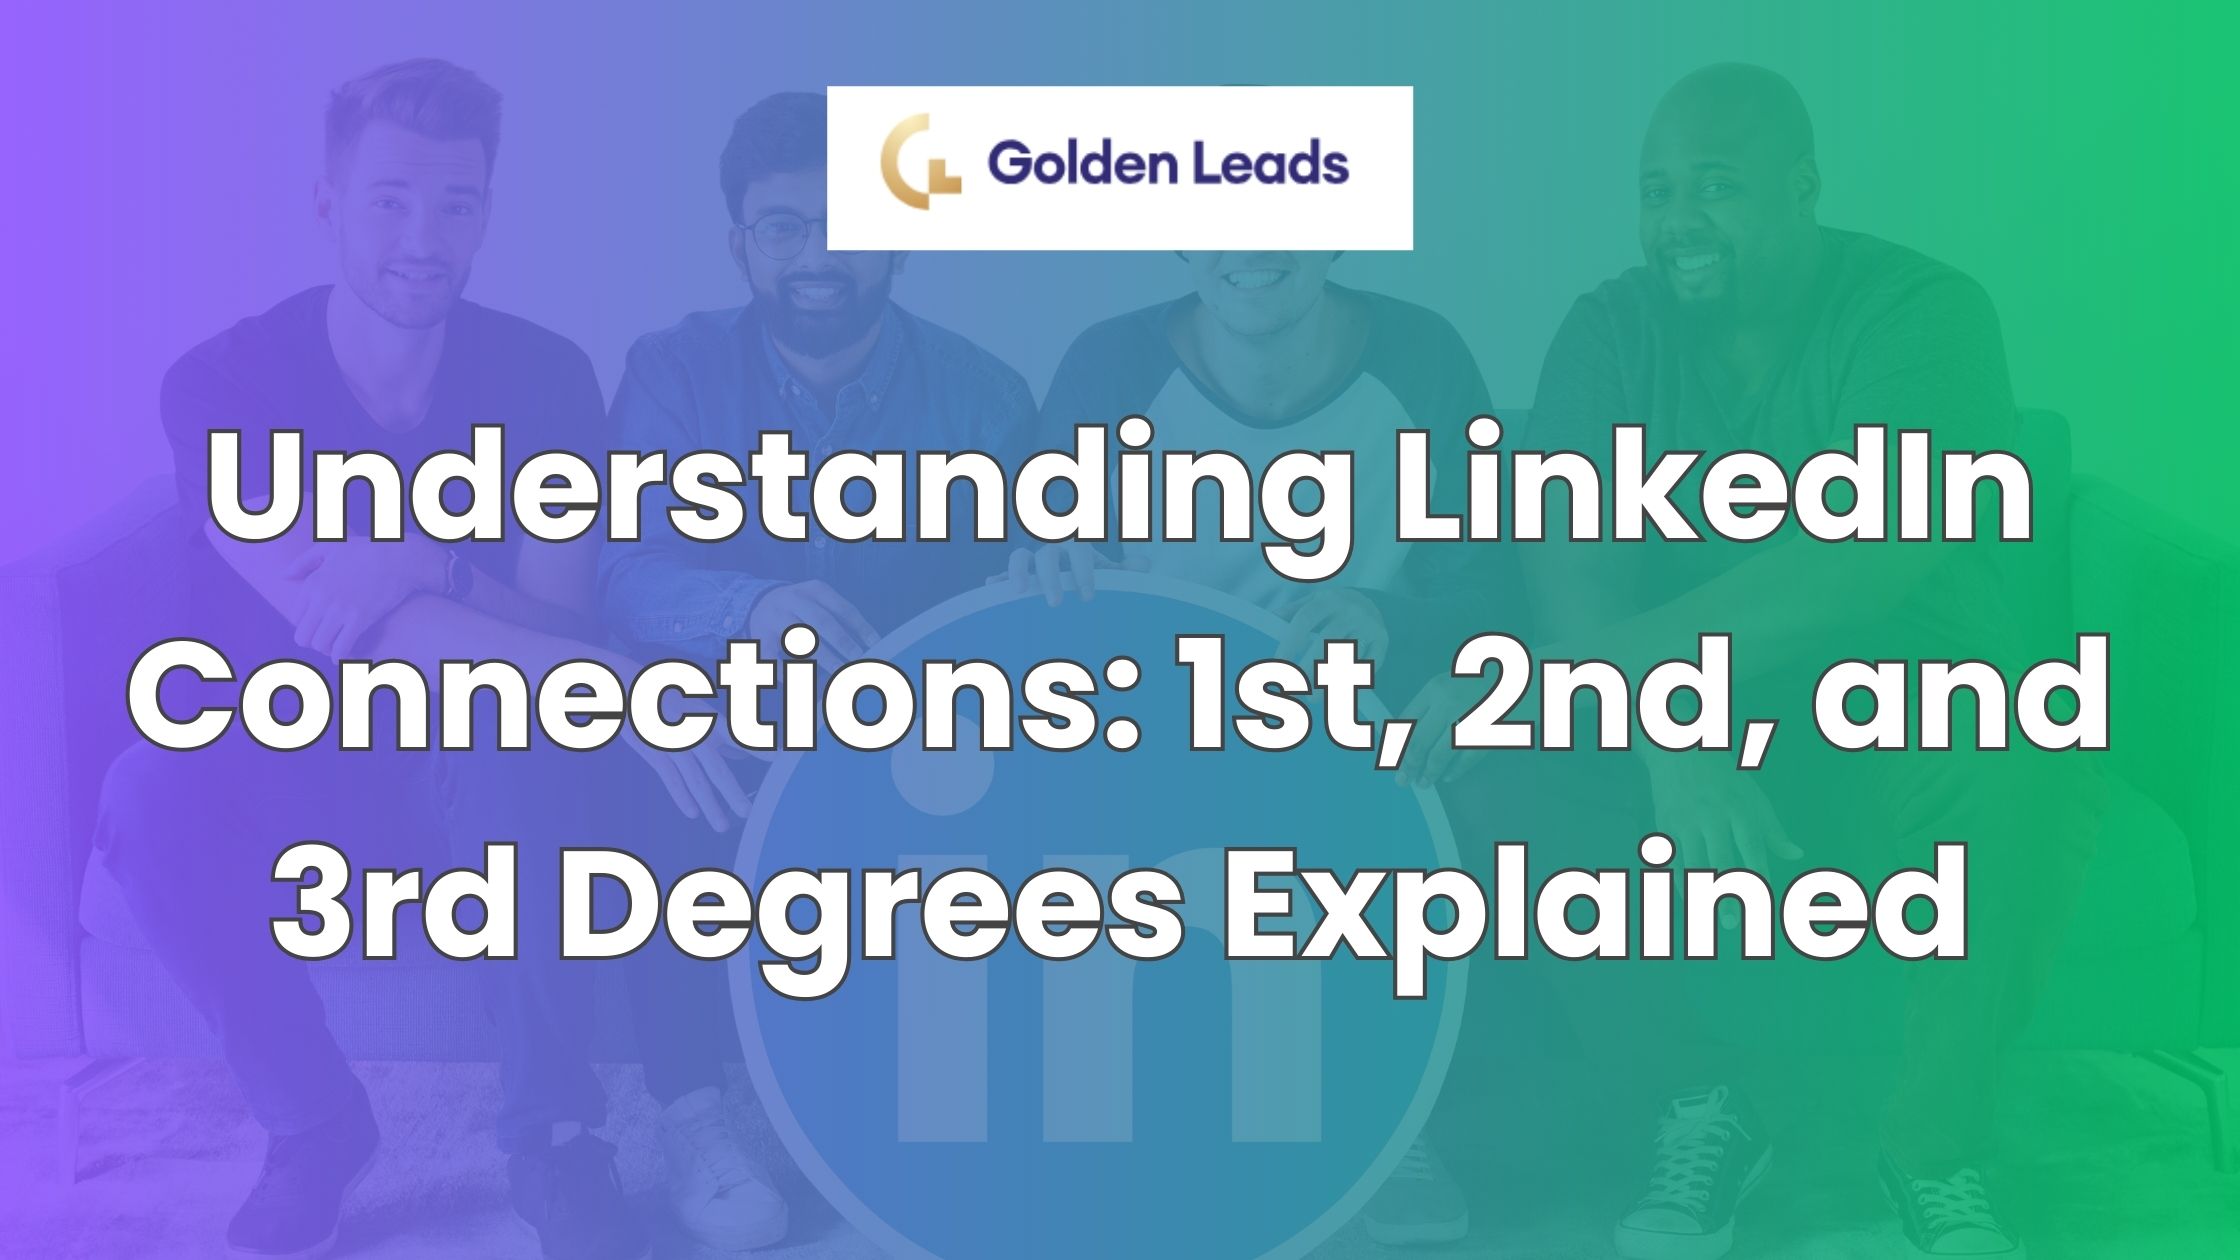 Understanding LinkedIn Connections 1st, 2nd, and 3rd Degrees Explained